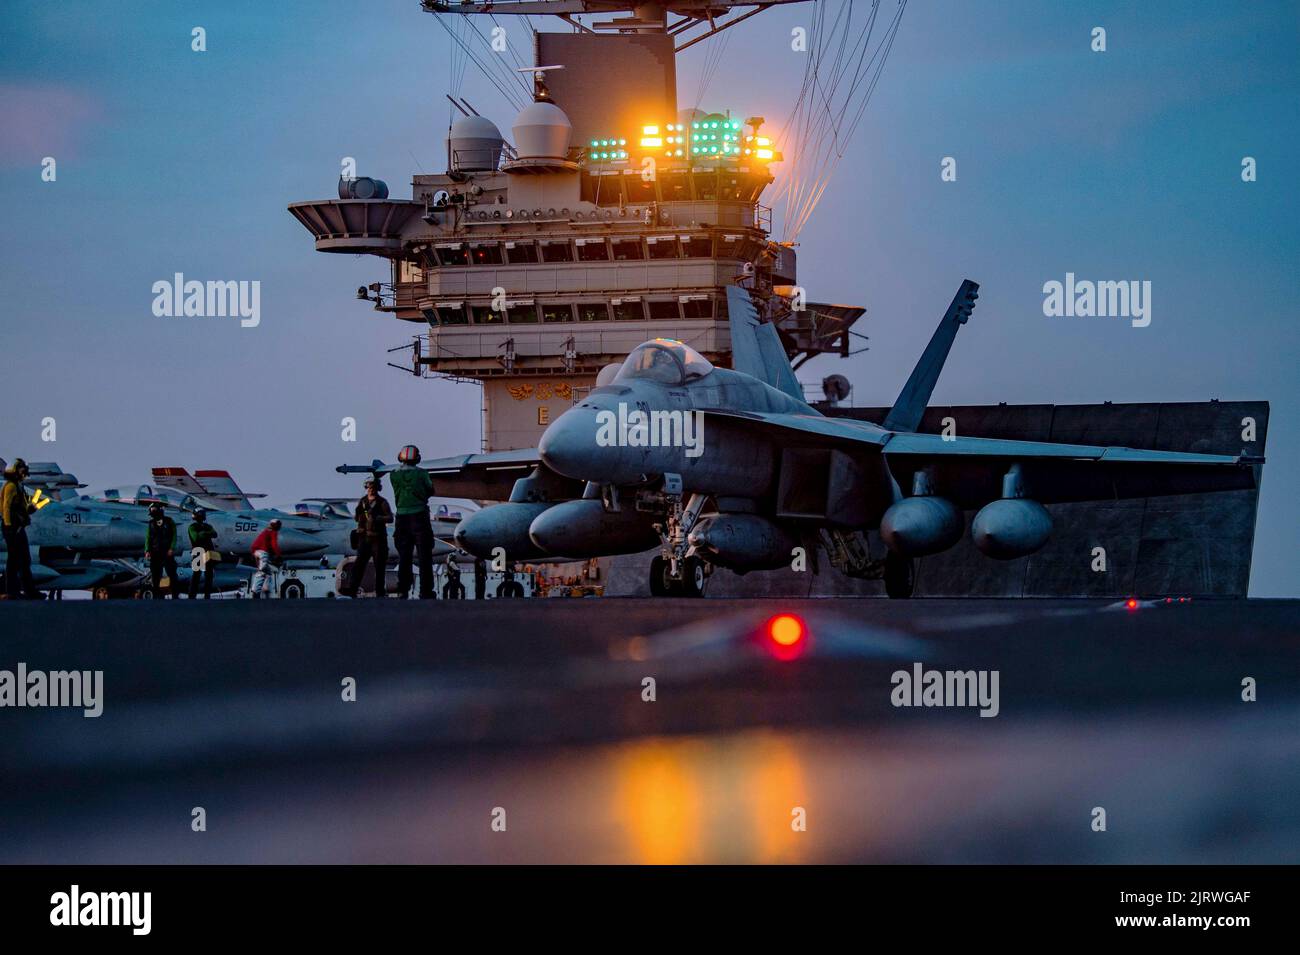 Palma, Spain. 24th Aug, 2022. A U.S. Navy F/A-18E Super Hornet fighter aircraft, attached to the Fighting Checkmates of Strike Fighter Squadron 211 prepares to launch during twilight operations from the flight deck of the Nimitz-class aircraft carrier USS Harry S. Truman, August 24, 2022 off the coast of Mallorca, Spain. Credit: MC3 Jack Hoppe/U.S. Navy/Alamy Live News Stock Photo